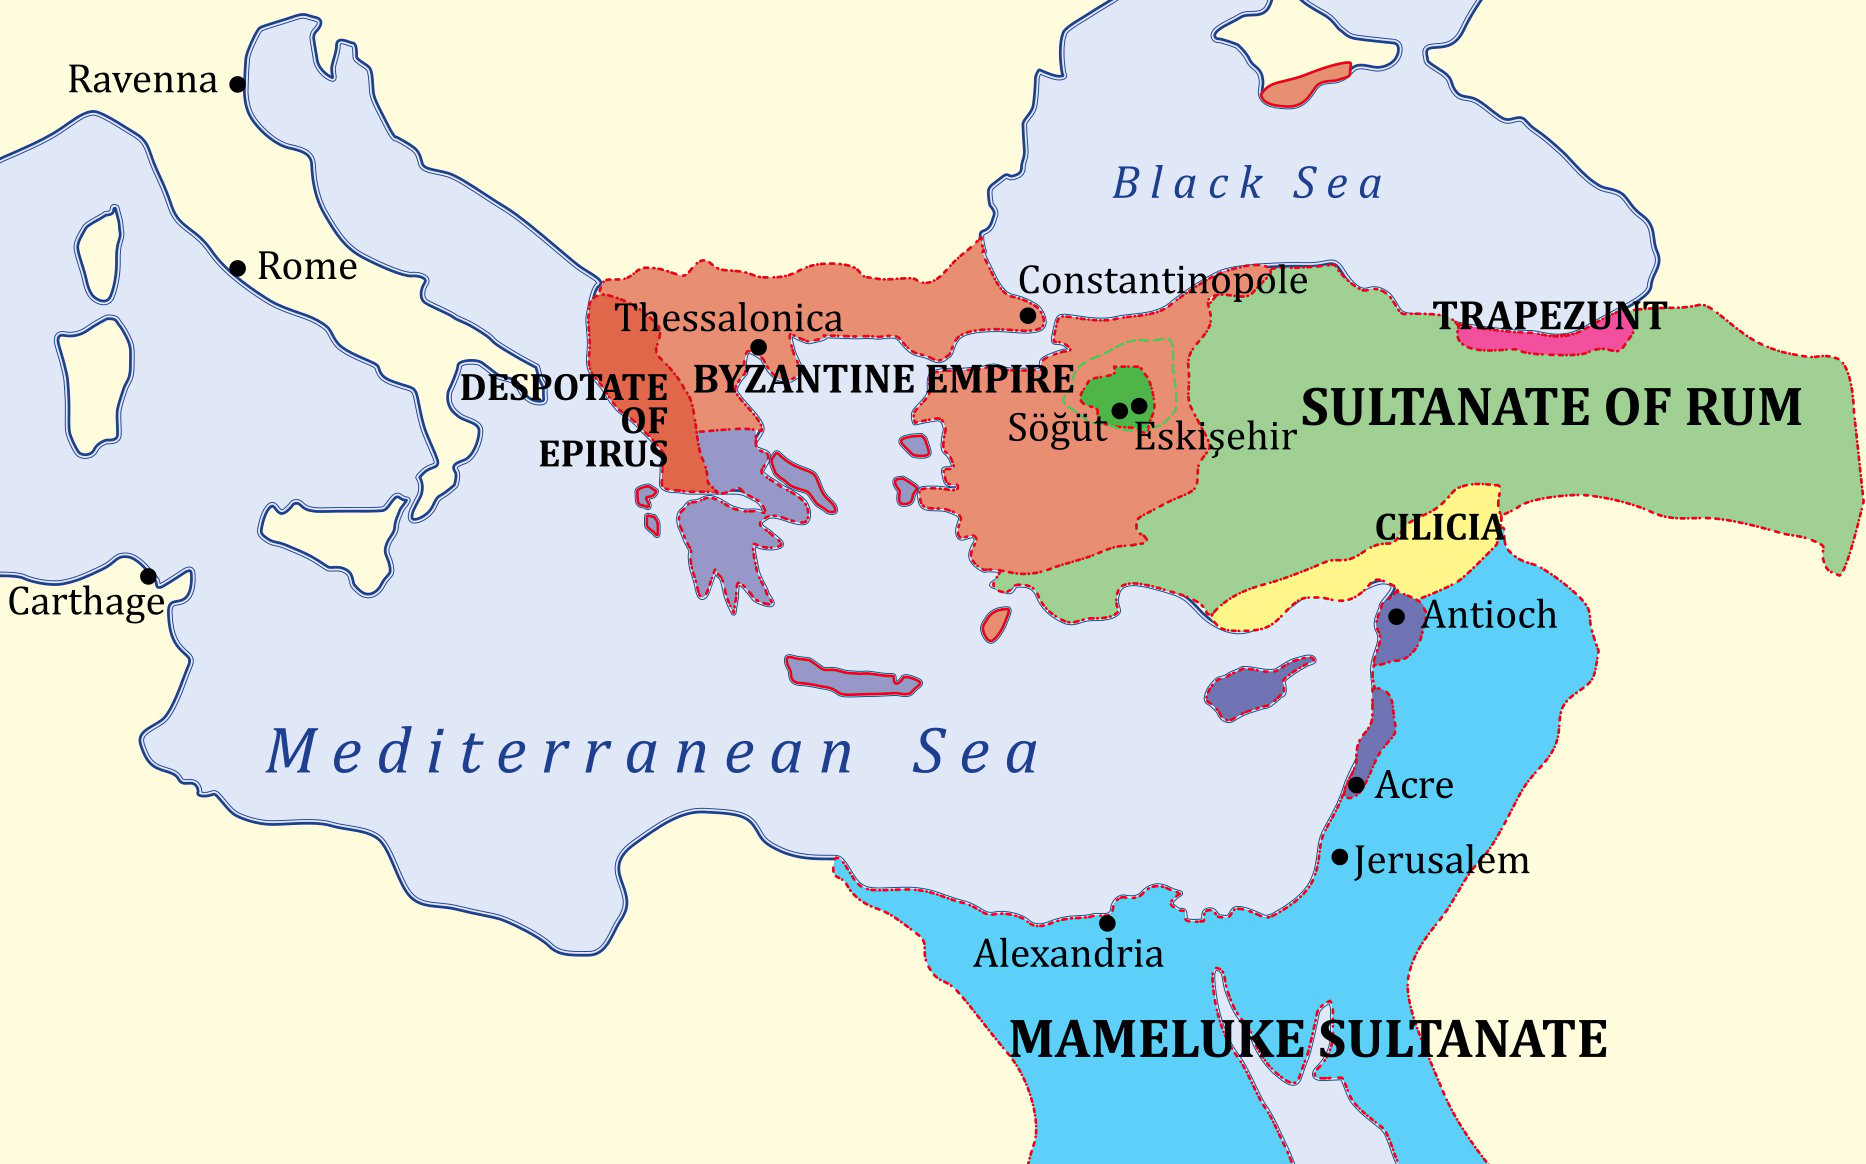 Map of Eastern Mediterranean c. 1263: The Byzantine Empire is in light red, the Despotate of Epirus in dark red, and the Ottoman Empire's domain by the 1300s in green, with dotted lines marking conquests up to 1326 CE. The Sultanate of Rûm is depicted in light green, the Armenian Kingdom of Cilicia in yellow, the Empire of Trebizond in magenta, minor Latin states in purple, and the Bahri dynasty of the Mamluk Sultanate in blue, encompassing Egypt and the Levant. Major cities and landmarks like Constantinople, Thessalonica, and the Mediterranean Sea are labeled.